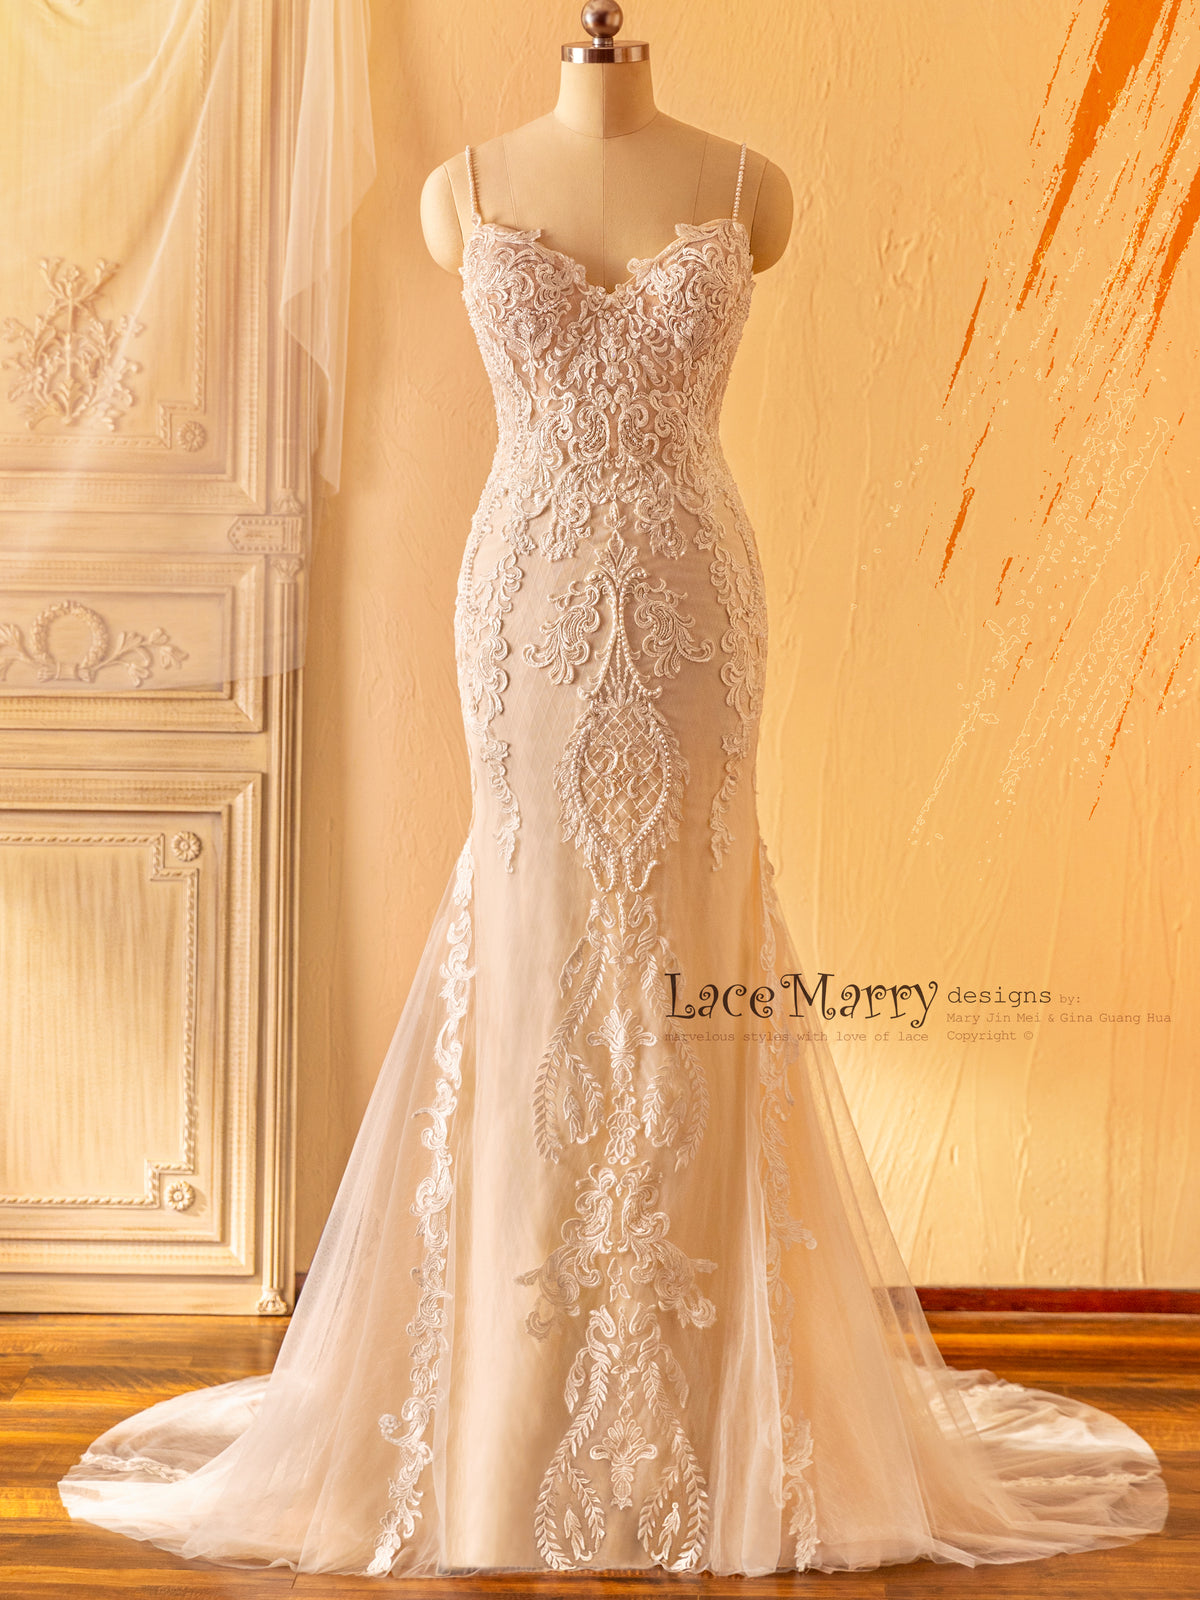 Fitted Wedding Dress with Gorgeous Swirl Appliqué Decoration